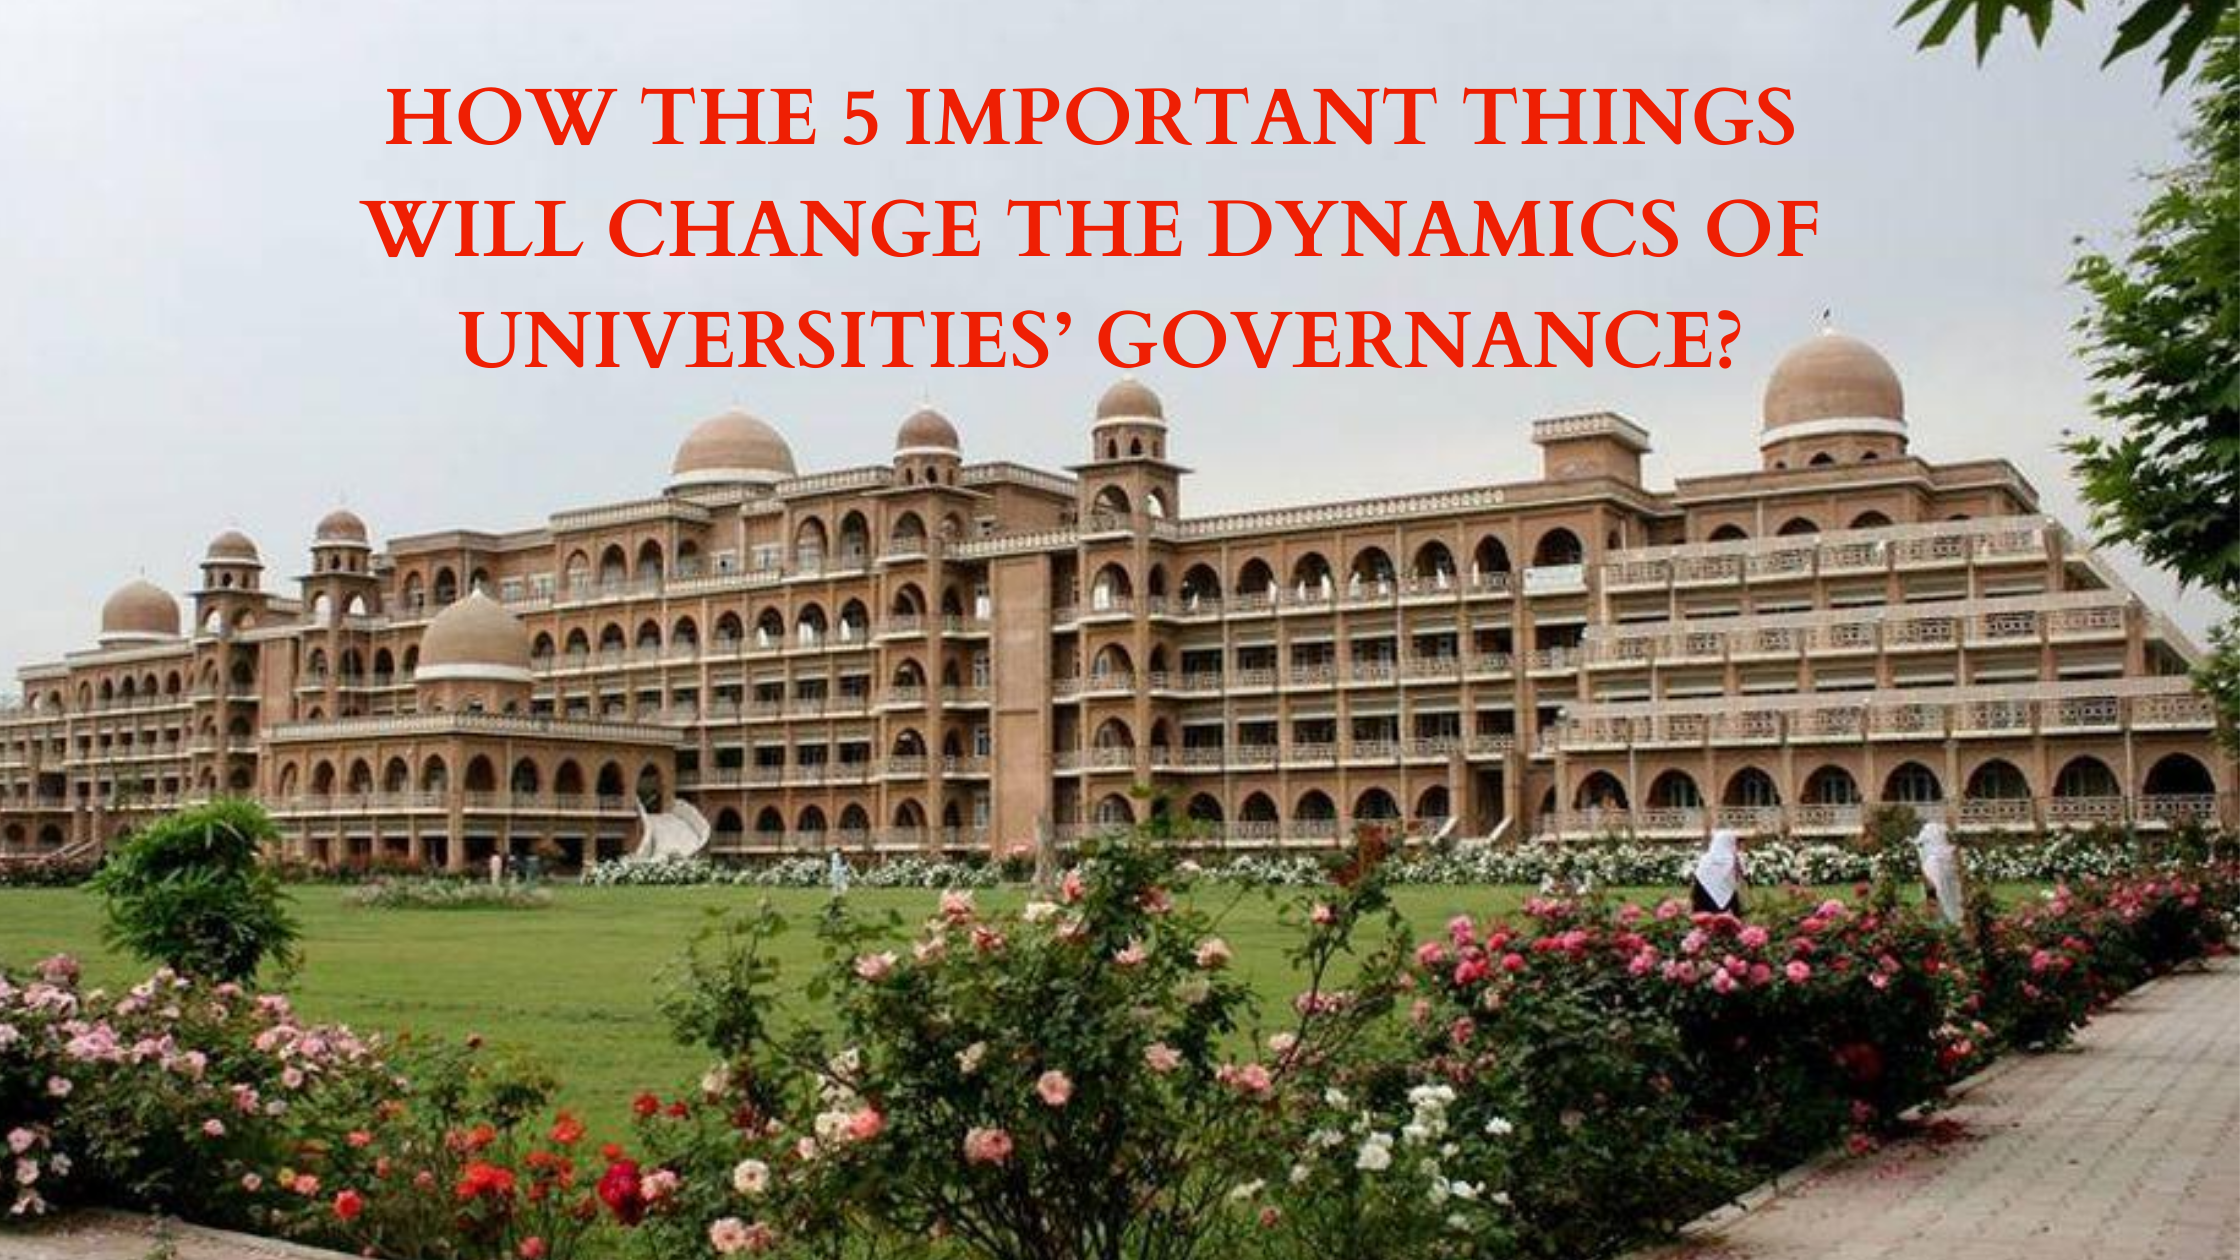 How the 4 important things will change the dynamics of universities’ governance?